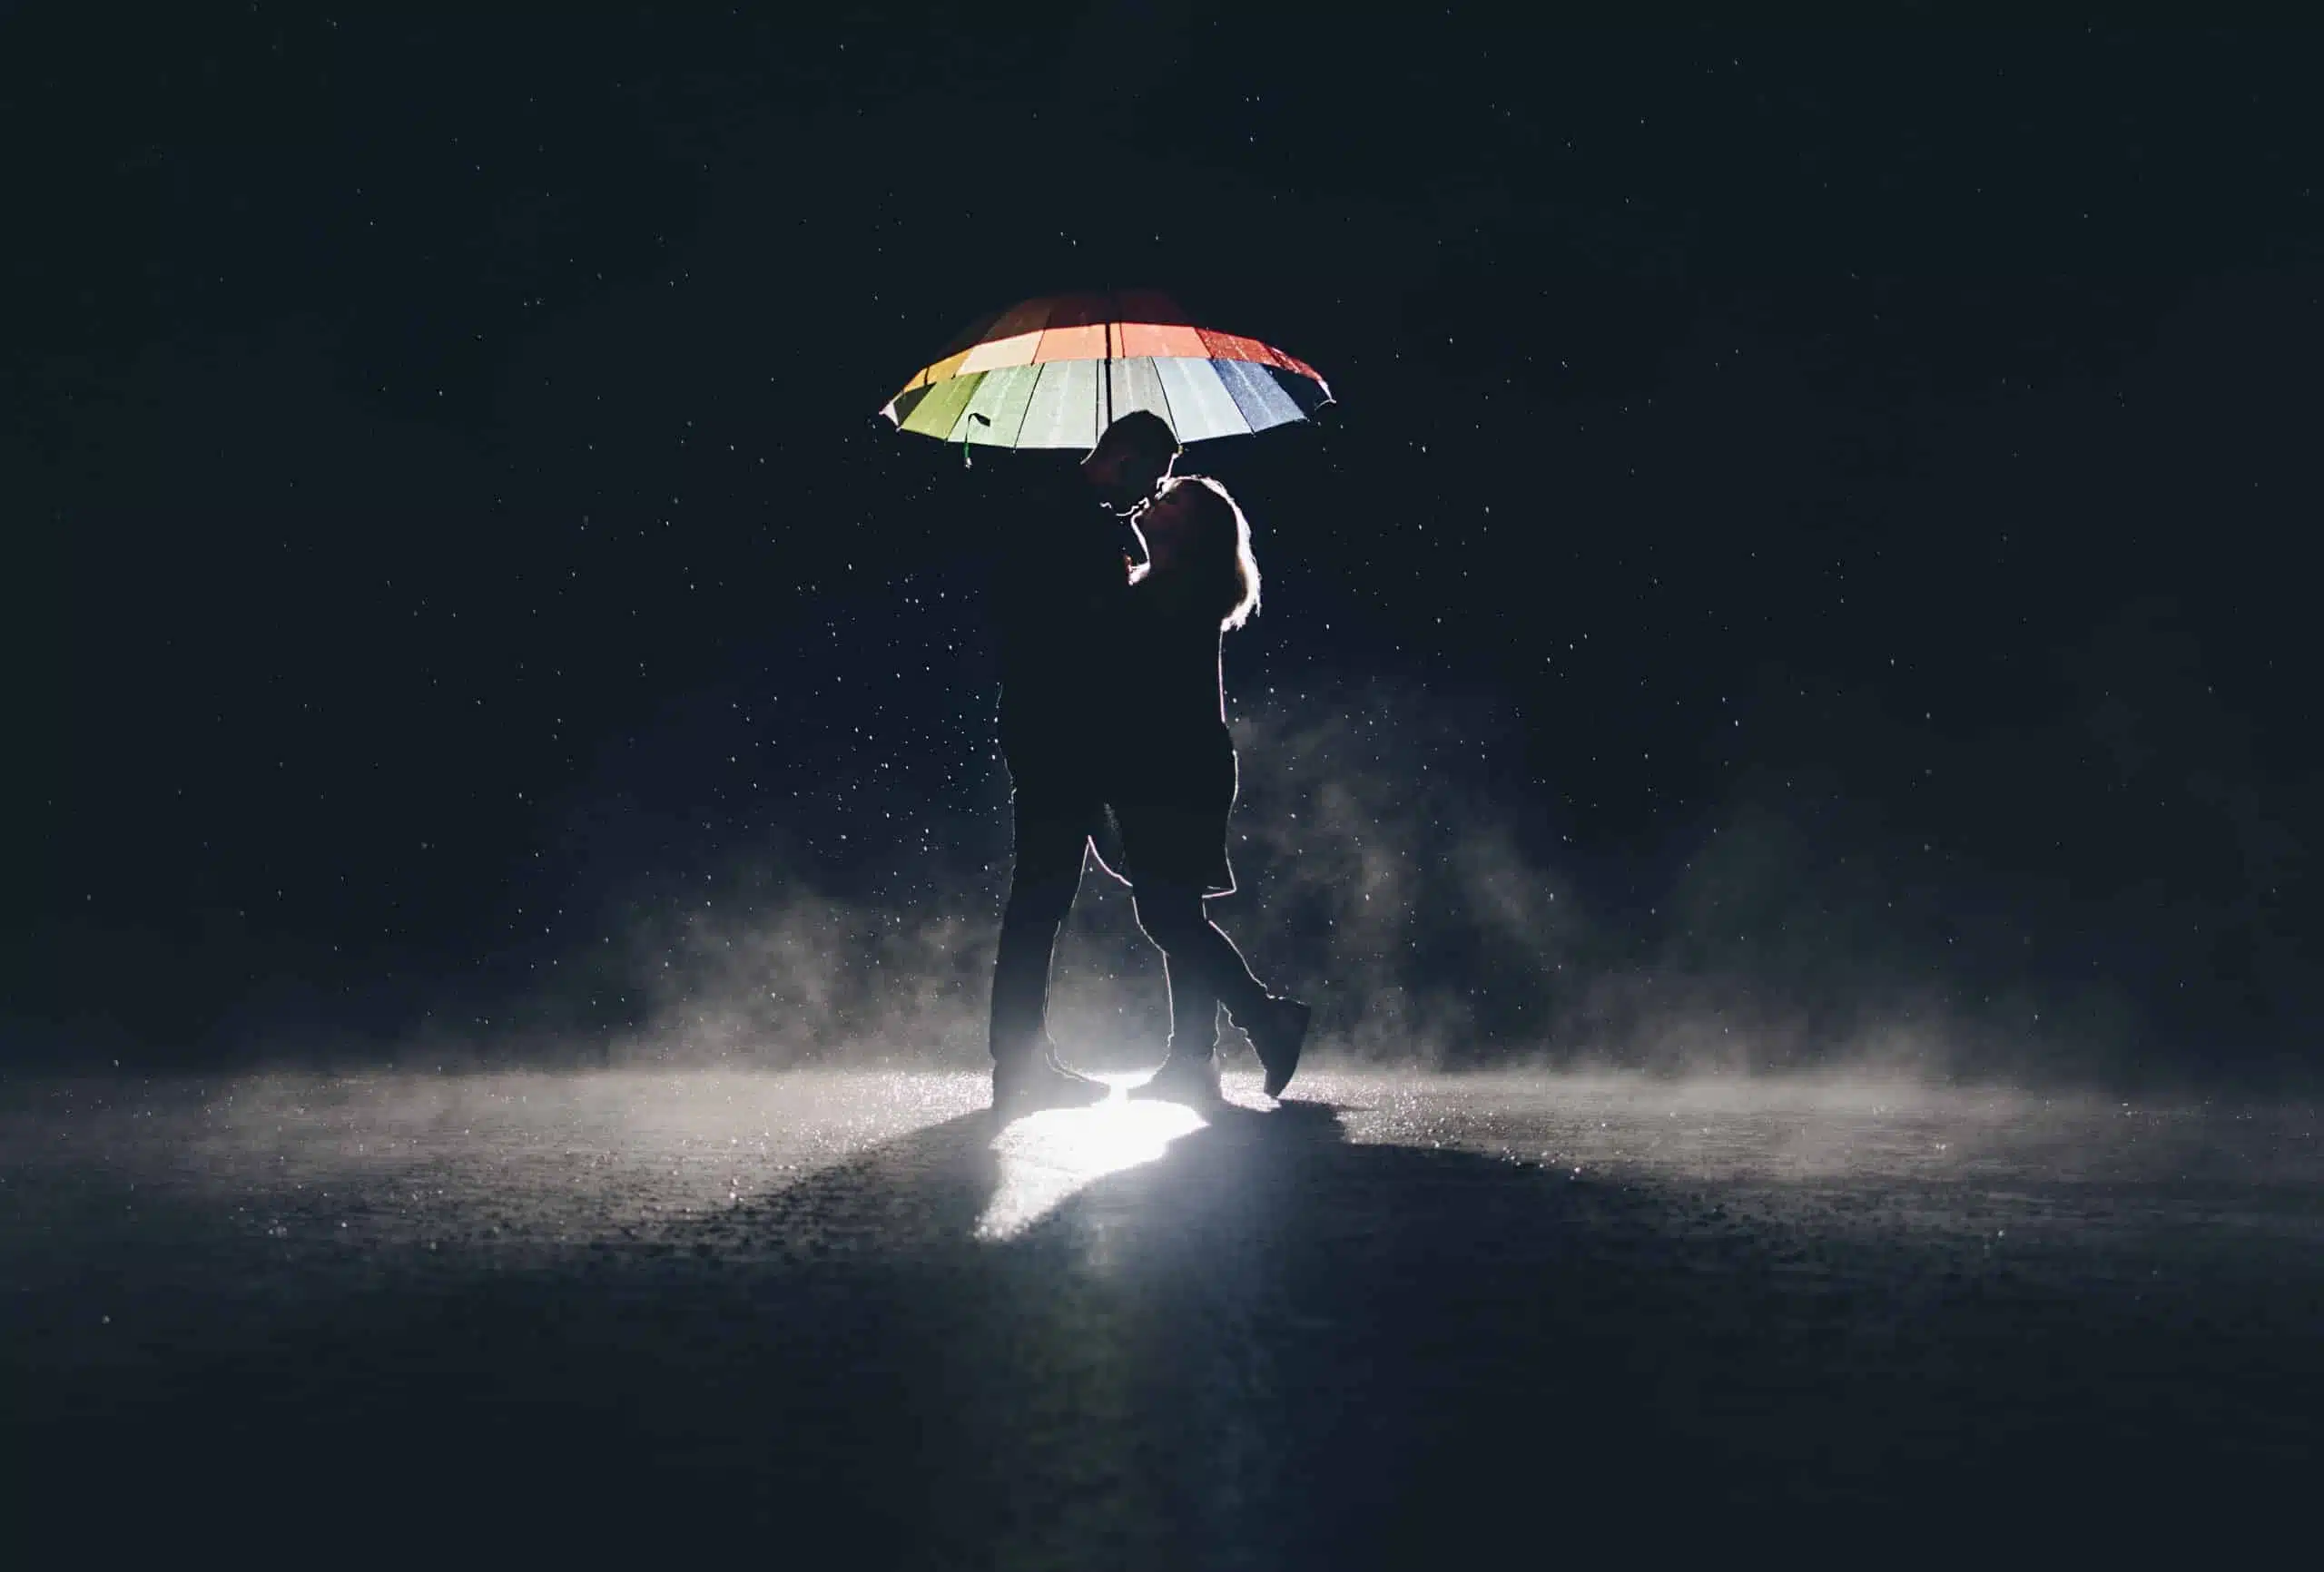 Lovers under at colorful umbrella in the rain at night.